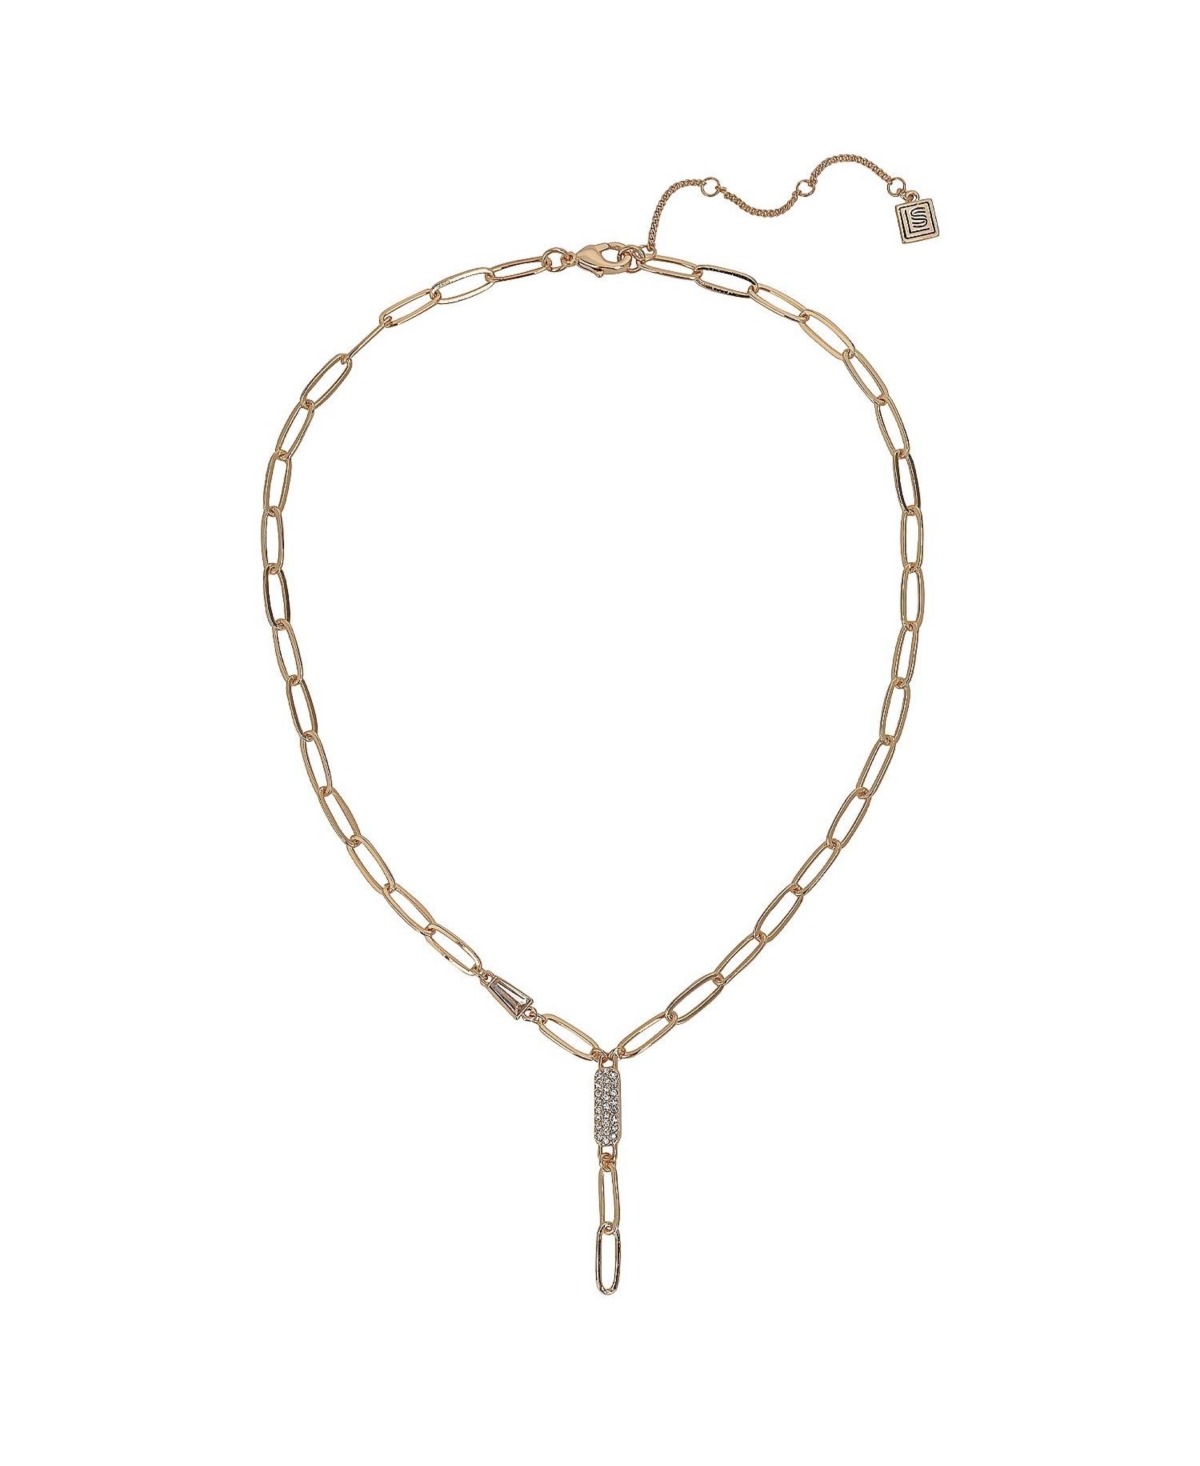 Gold Tone Chain Y Necklace with Crystal Stone Accents - Gold